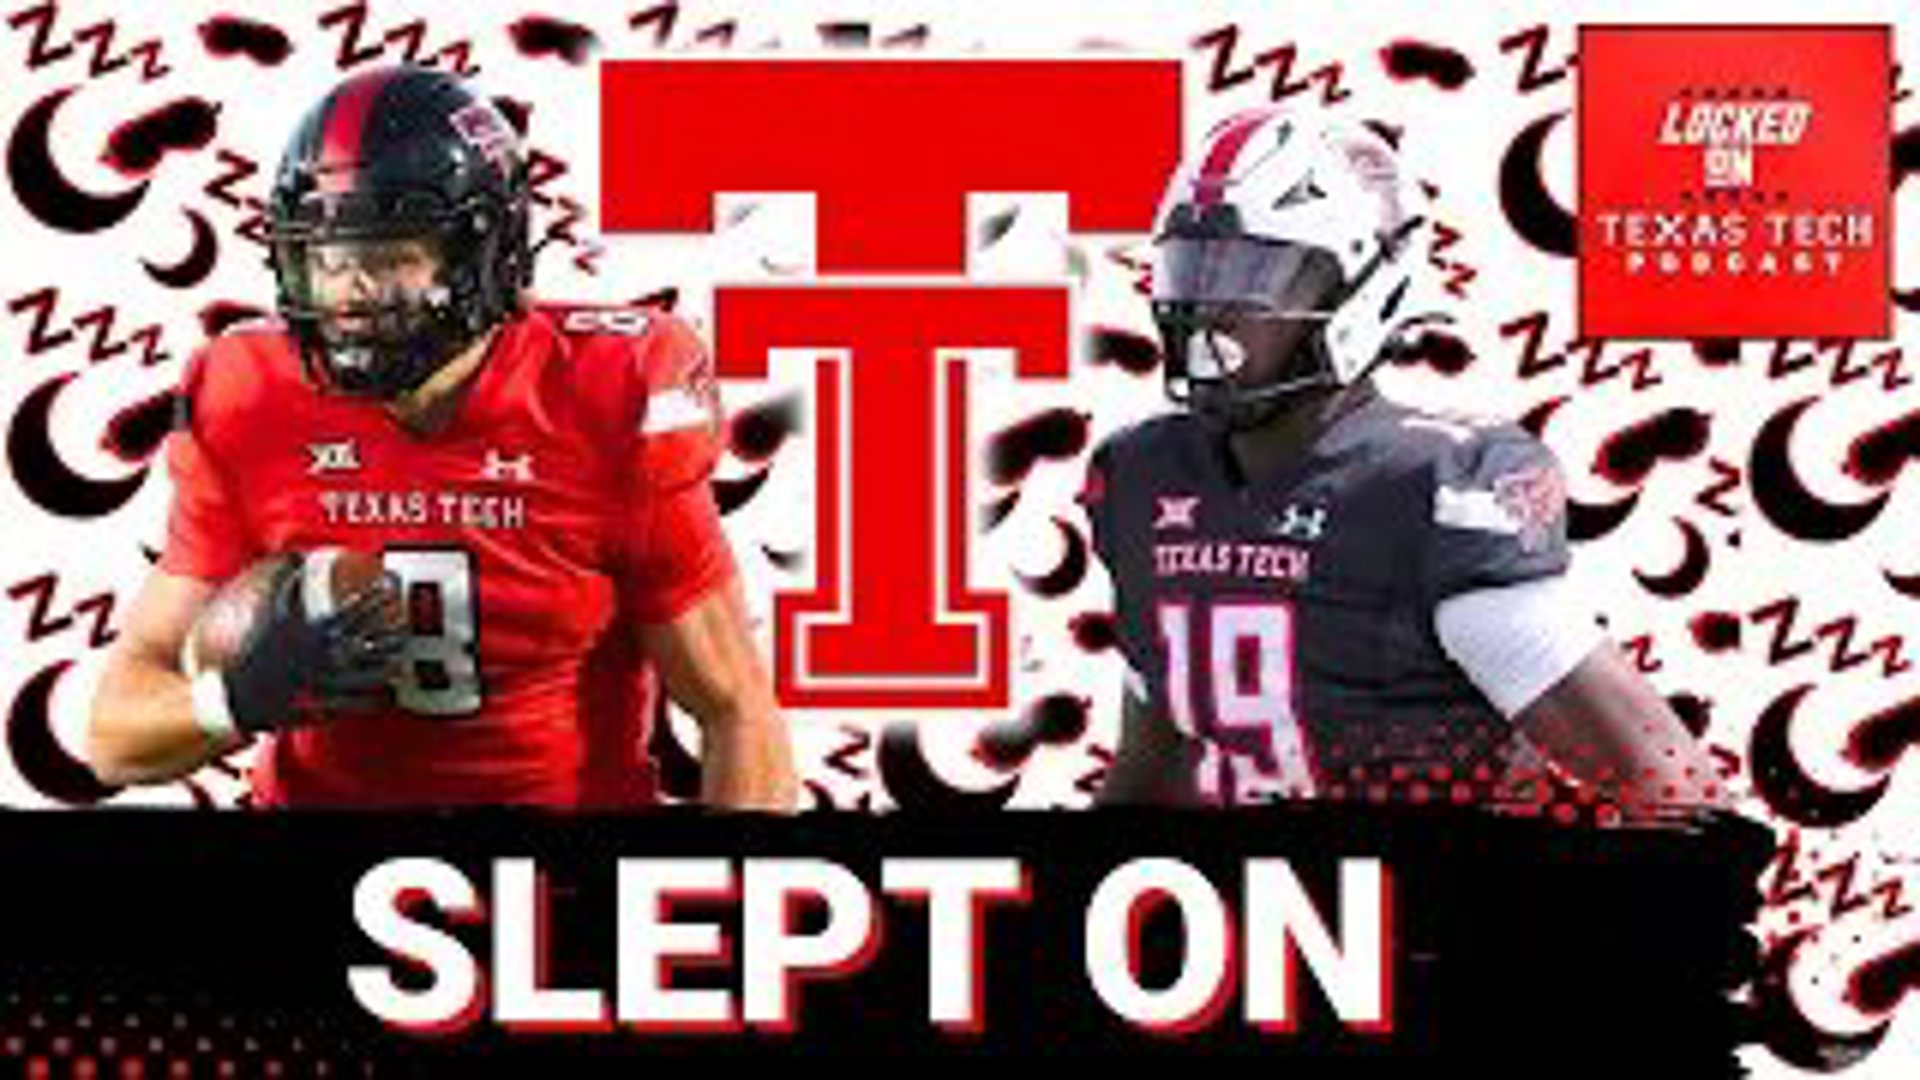 Today from Lubbock, TX, on Locked On Texas Tech:

- L.O.T.T.'s most slept on
- major sleep
- minor sleep 

All coming up on Locked On Texas Tech!